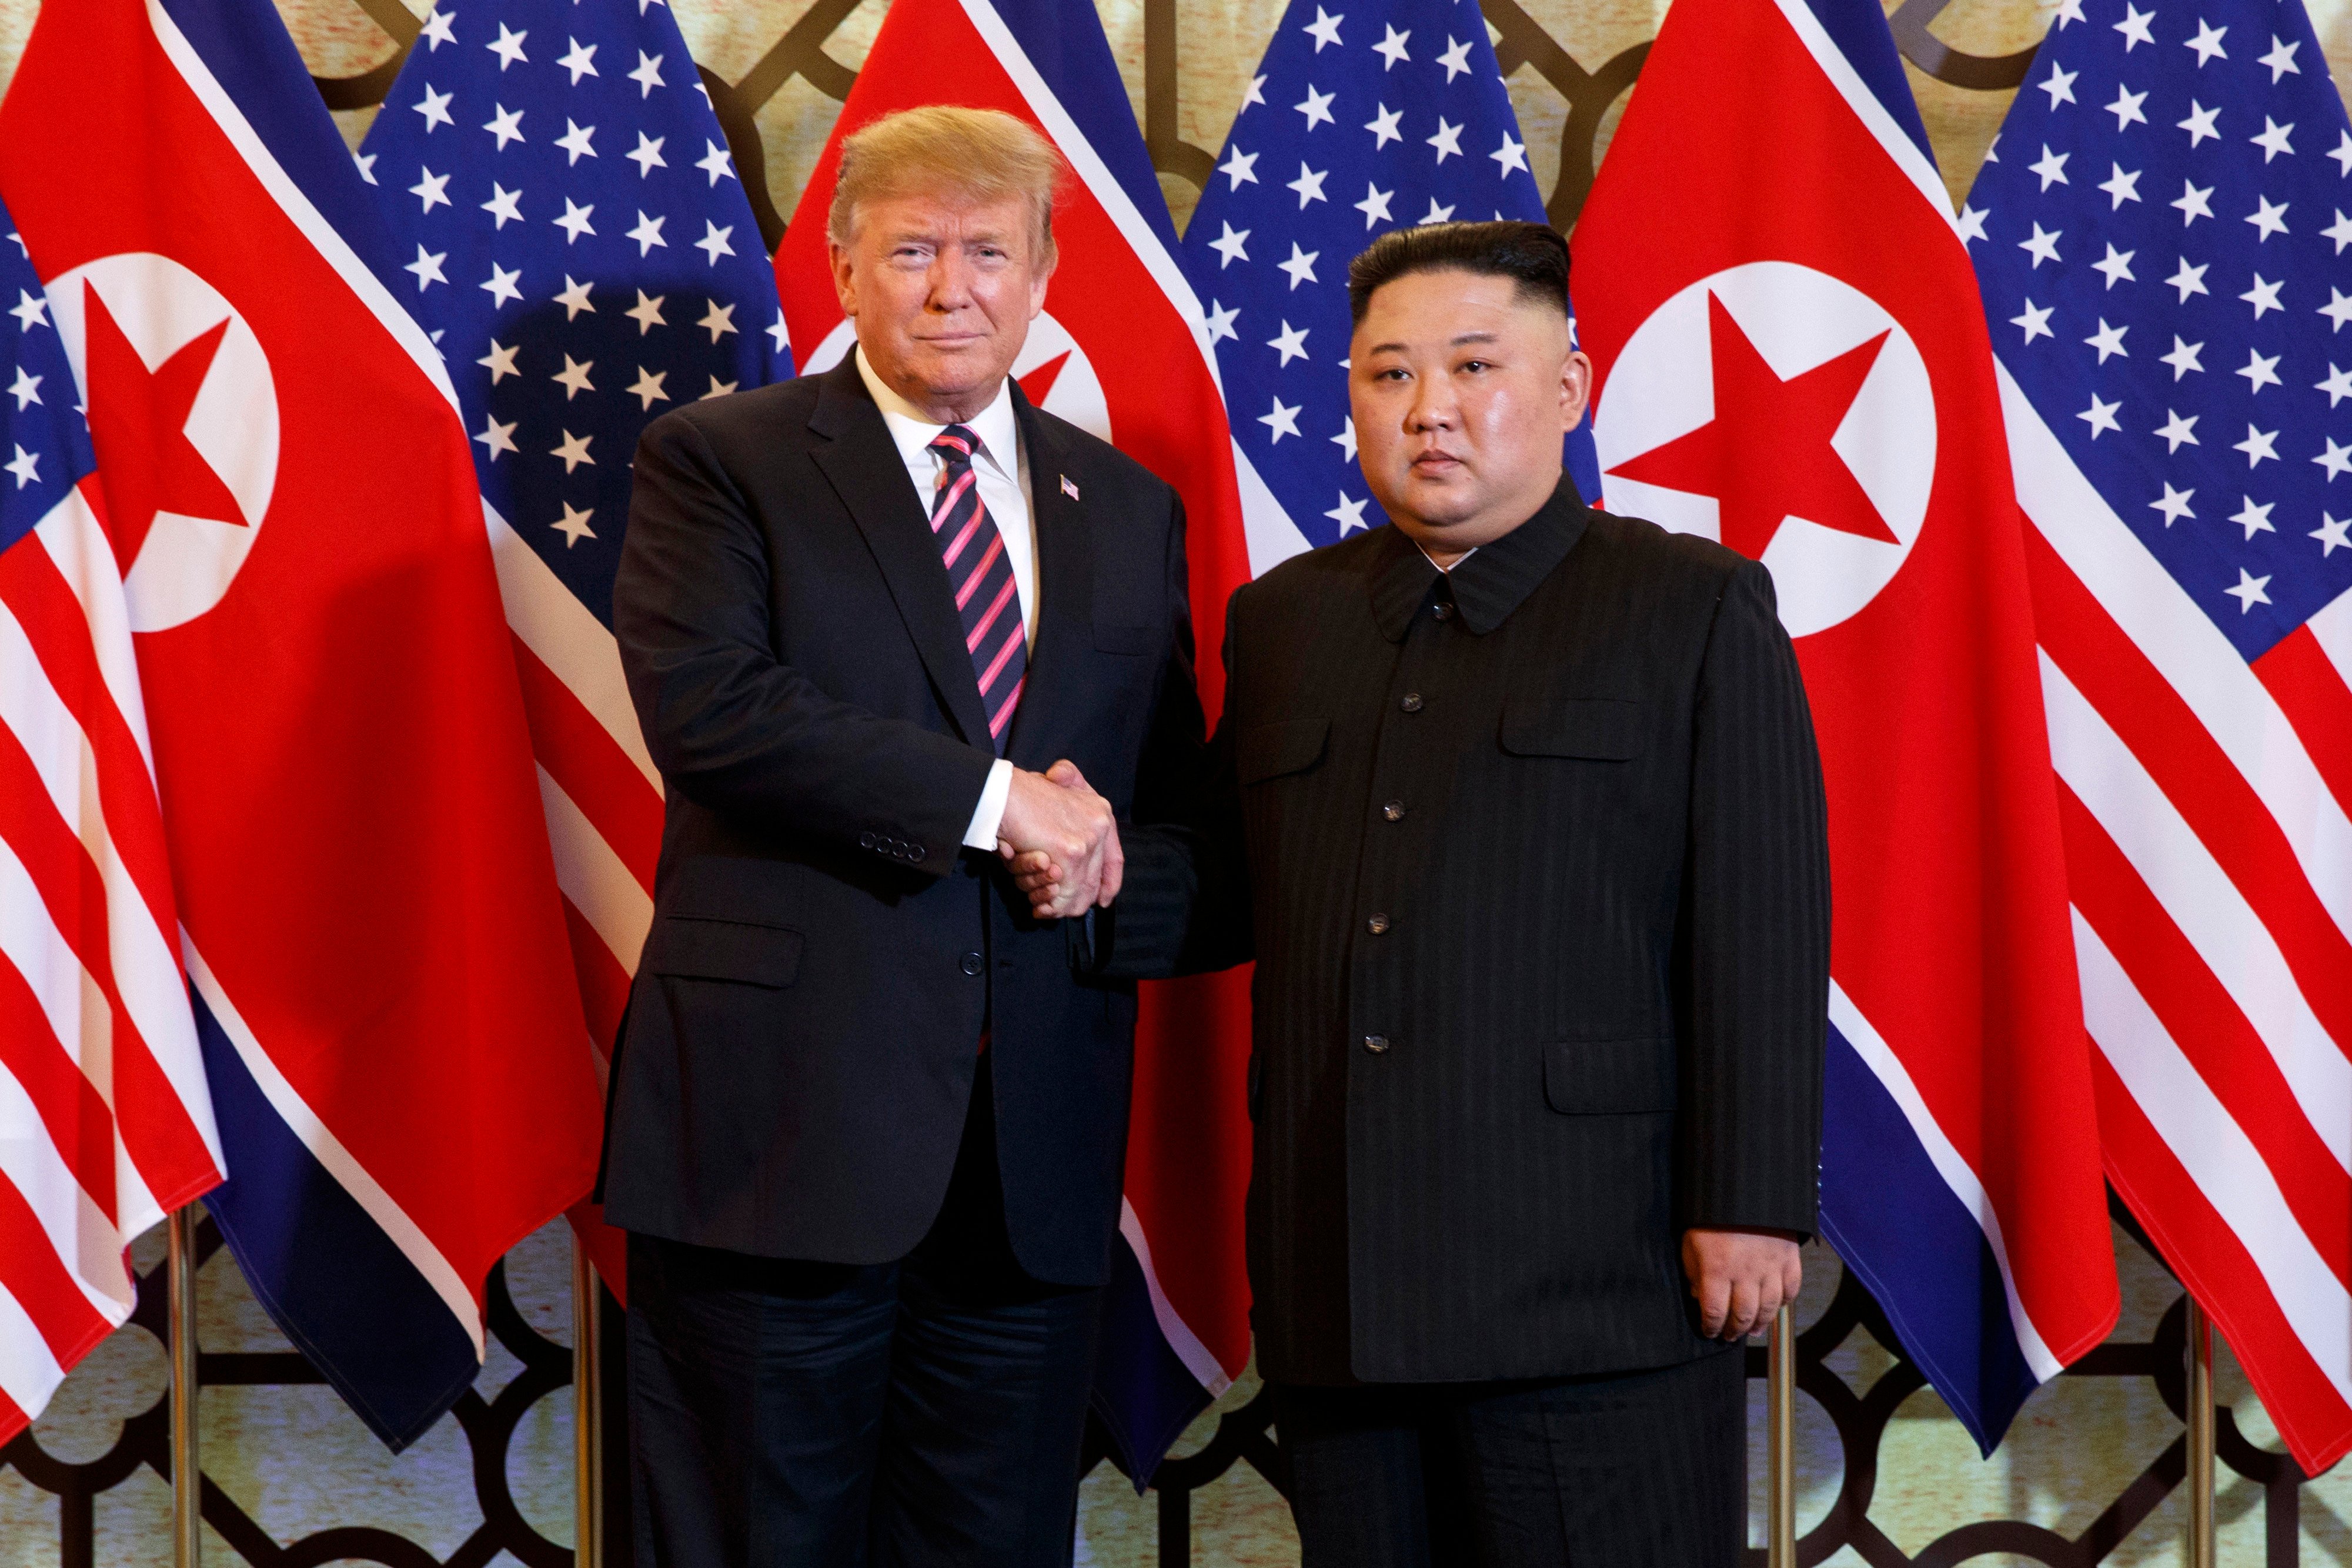 Then US President Donald Trump poses with North Korean leader Kim Jong-un for a photo in Hanoi, Vietnam, in 2019. Photo: AP